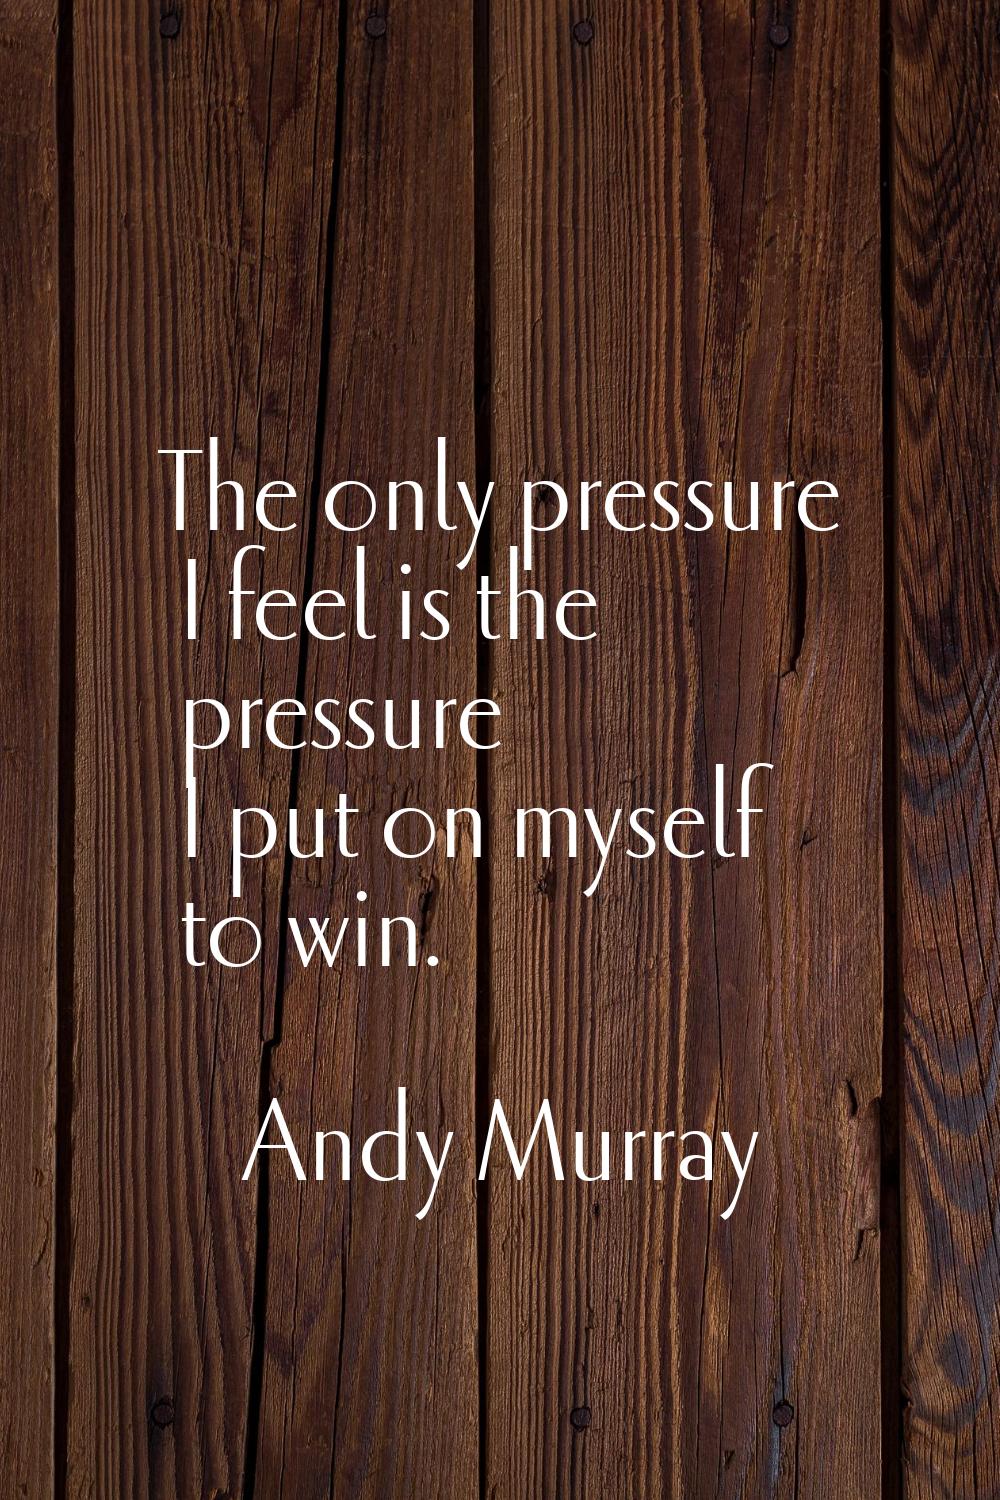 The only pressure I feel is the pressure I put on myself to win.